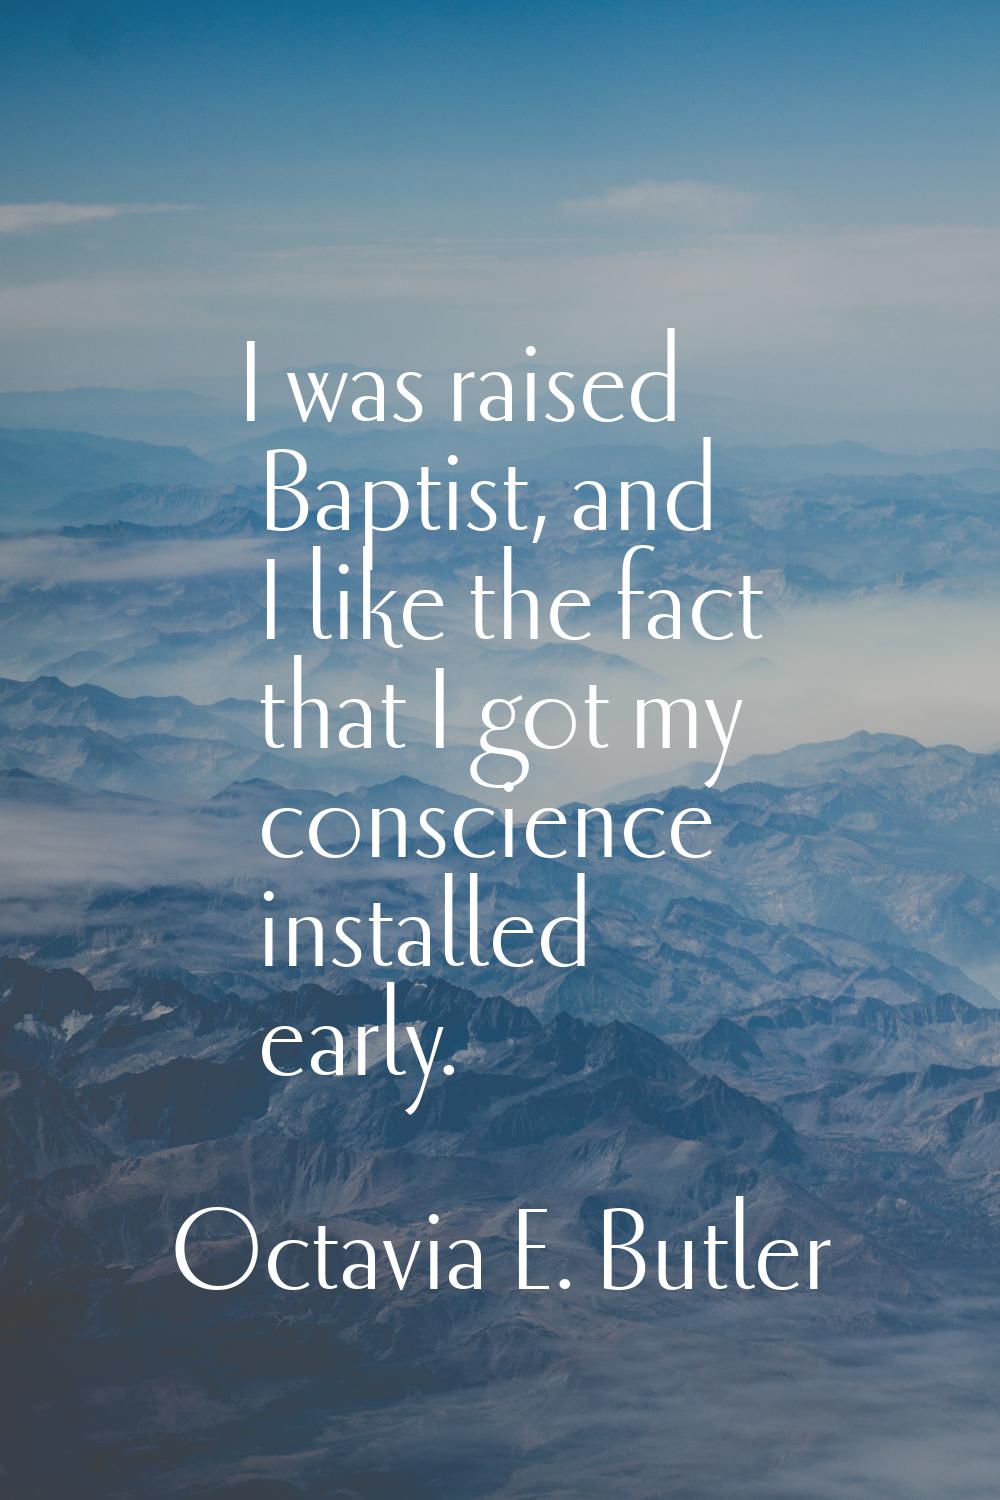 I was raised Baptist, and I like the fact that I got my conscience installed early.